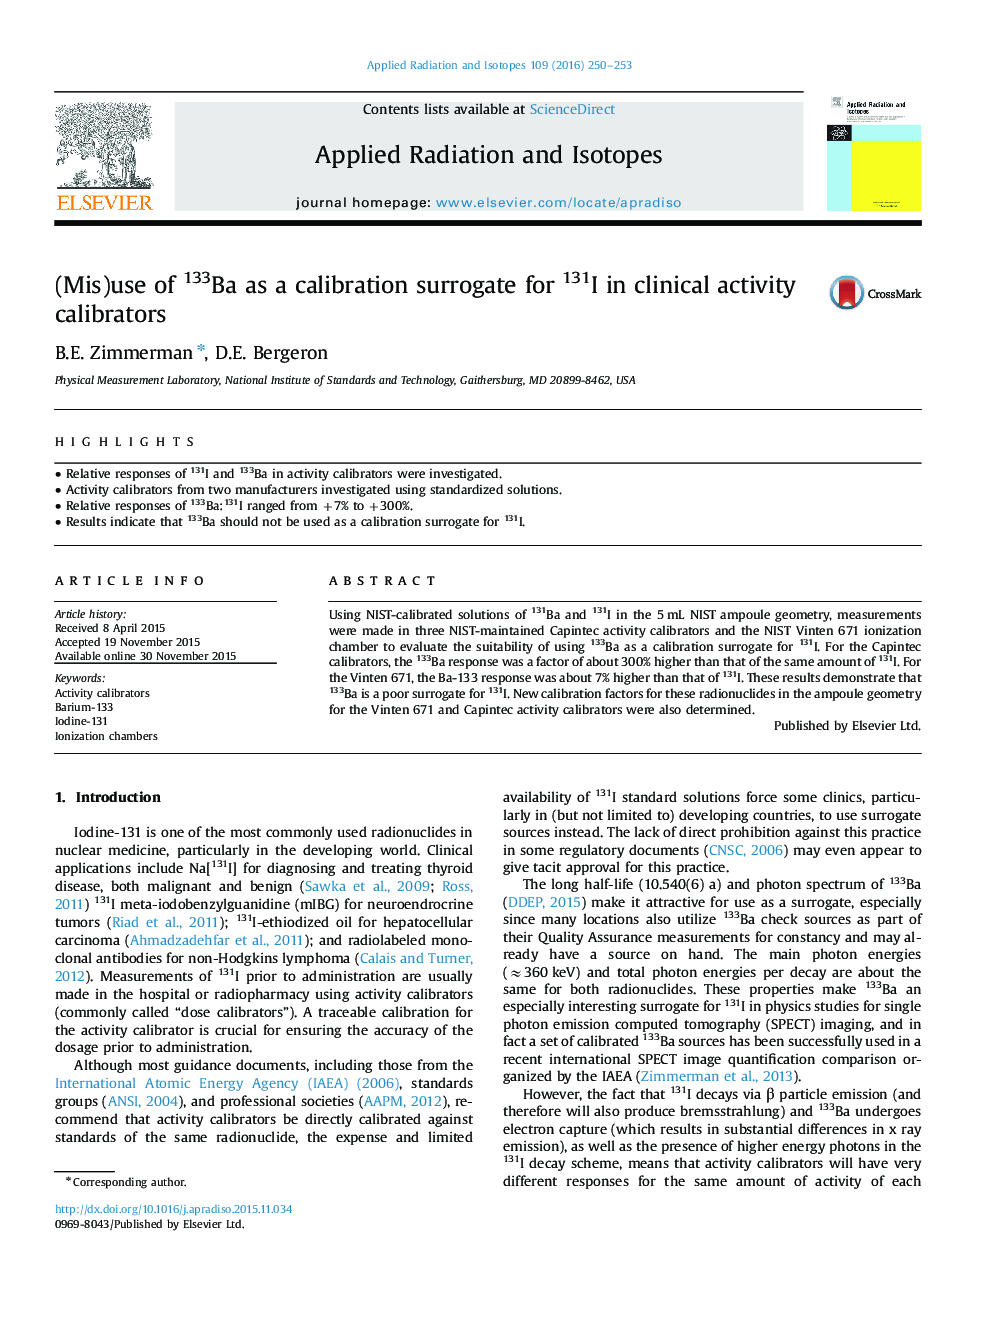 (Mis)use of 133Ba as a calibration surrogate for 131I in clinical activity calibrators